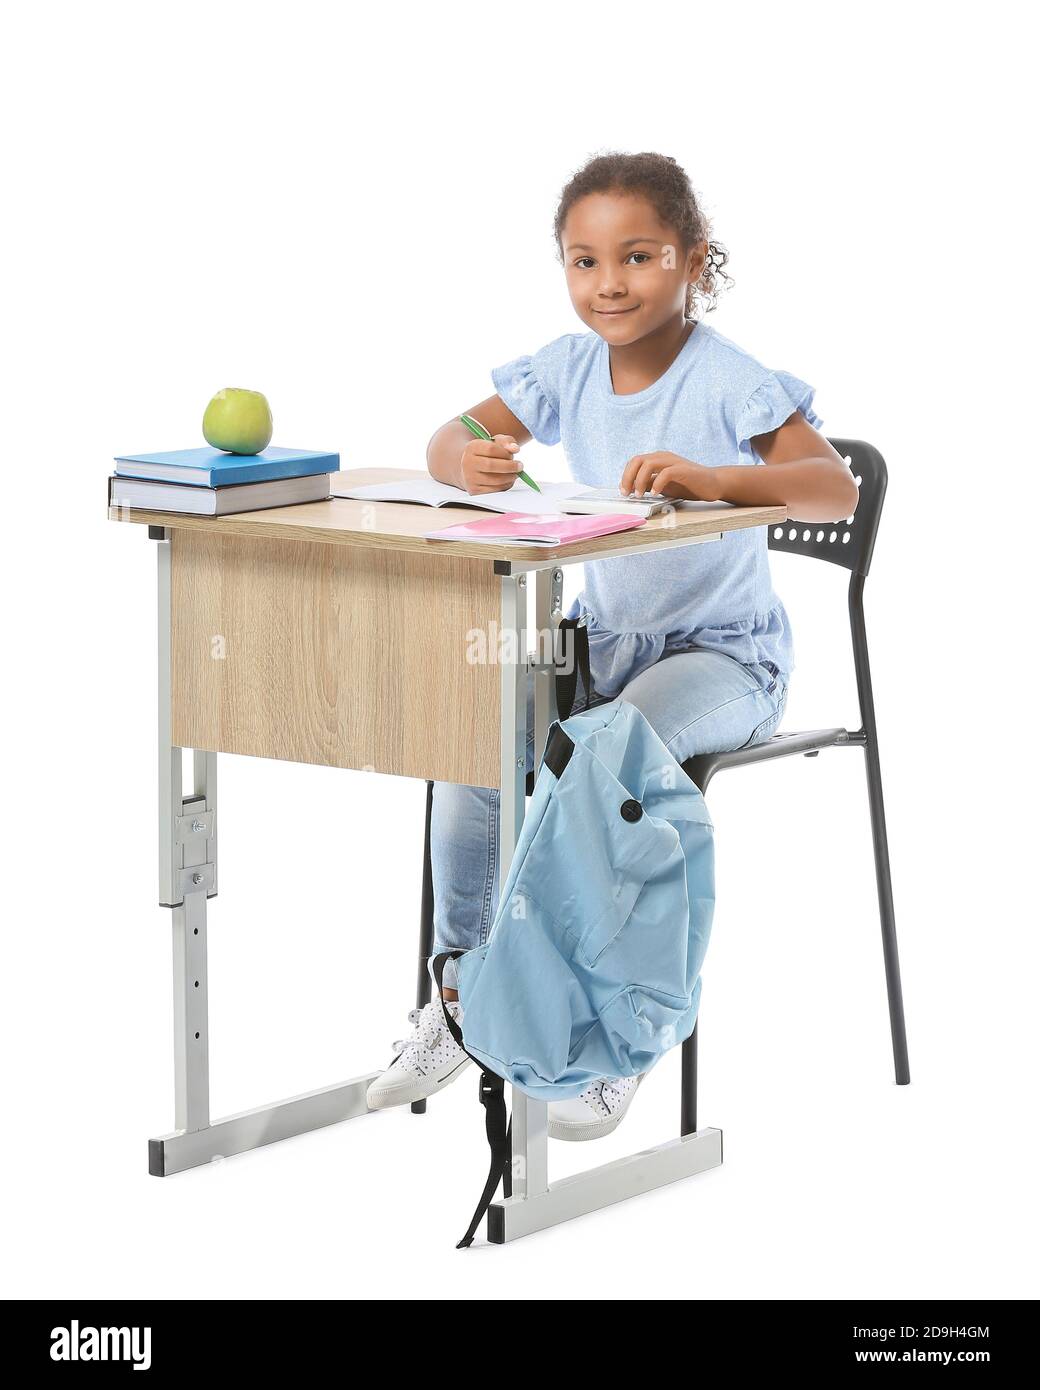 Little African-American pupil sitting at school desk against white background Stock Photo